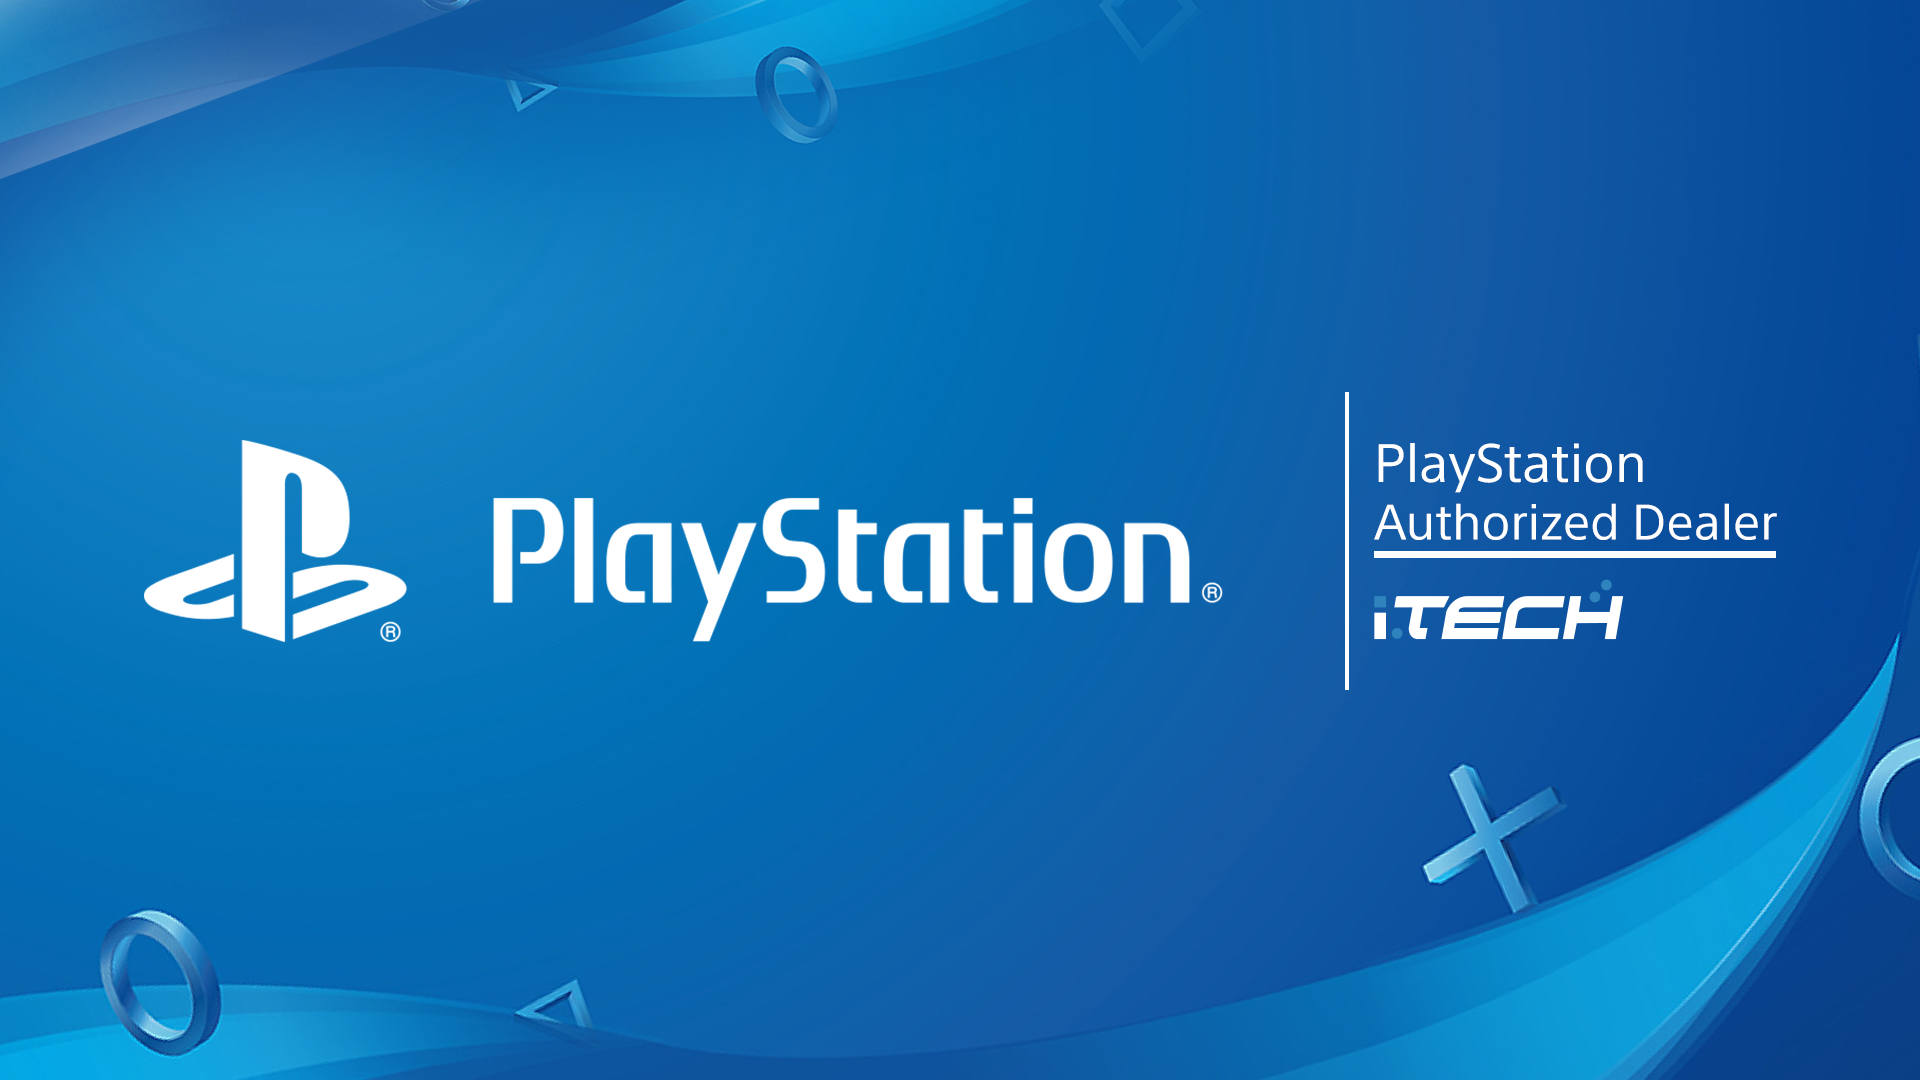 Playstation turkey store ps. PS Store. PS Sony PLAYSTATION Store. PLAYSTATION логотип. PLAYSTATION Store logo.